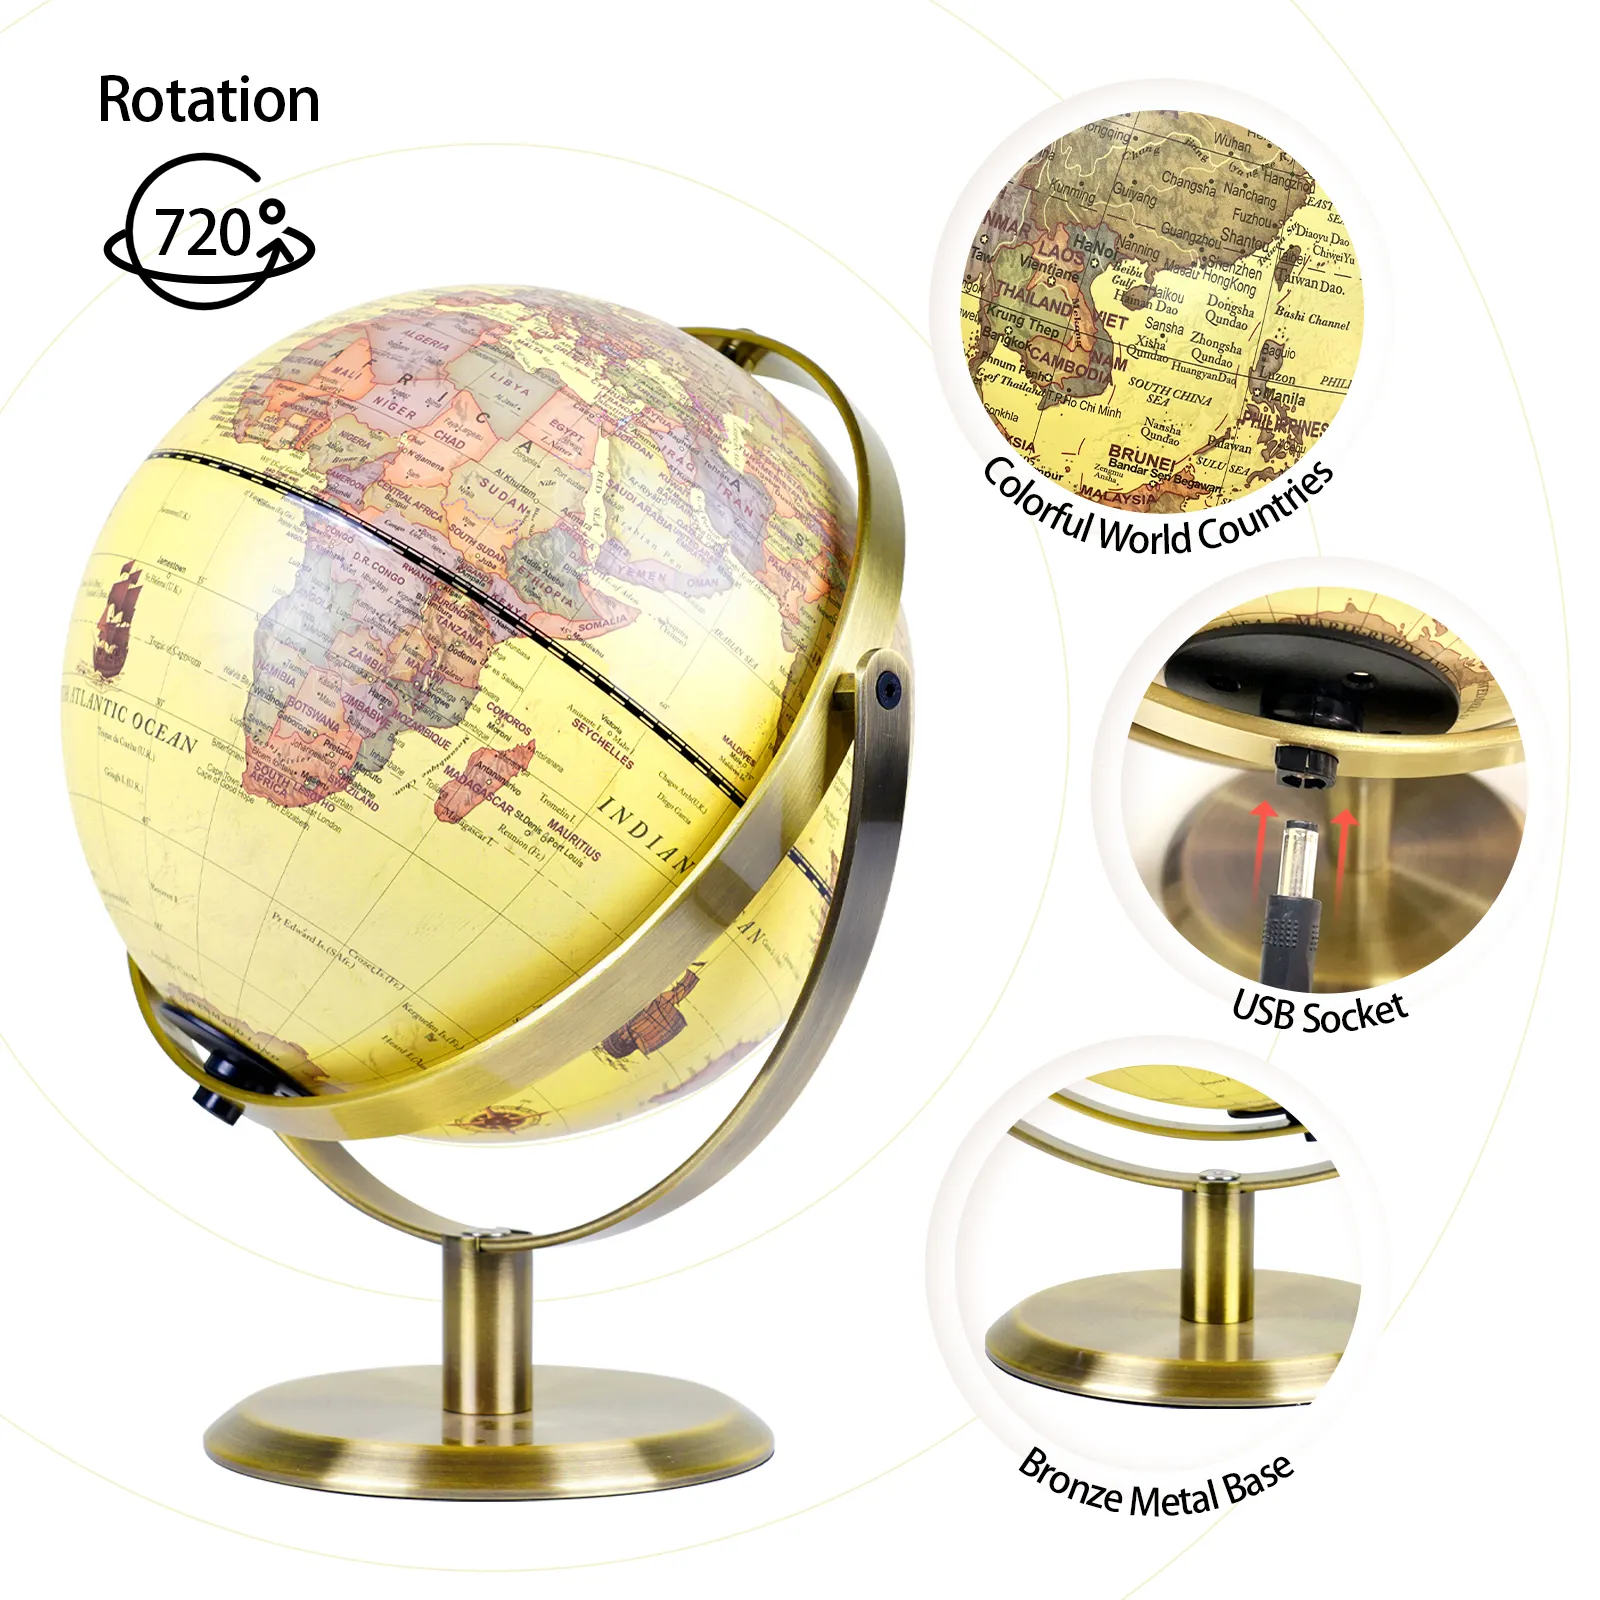 8 Inch 20cm 720 degree rotation matt finish antique relief globe with bronze universal bracket for Education Demo Home Office